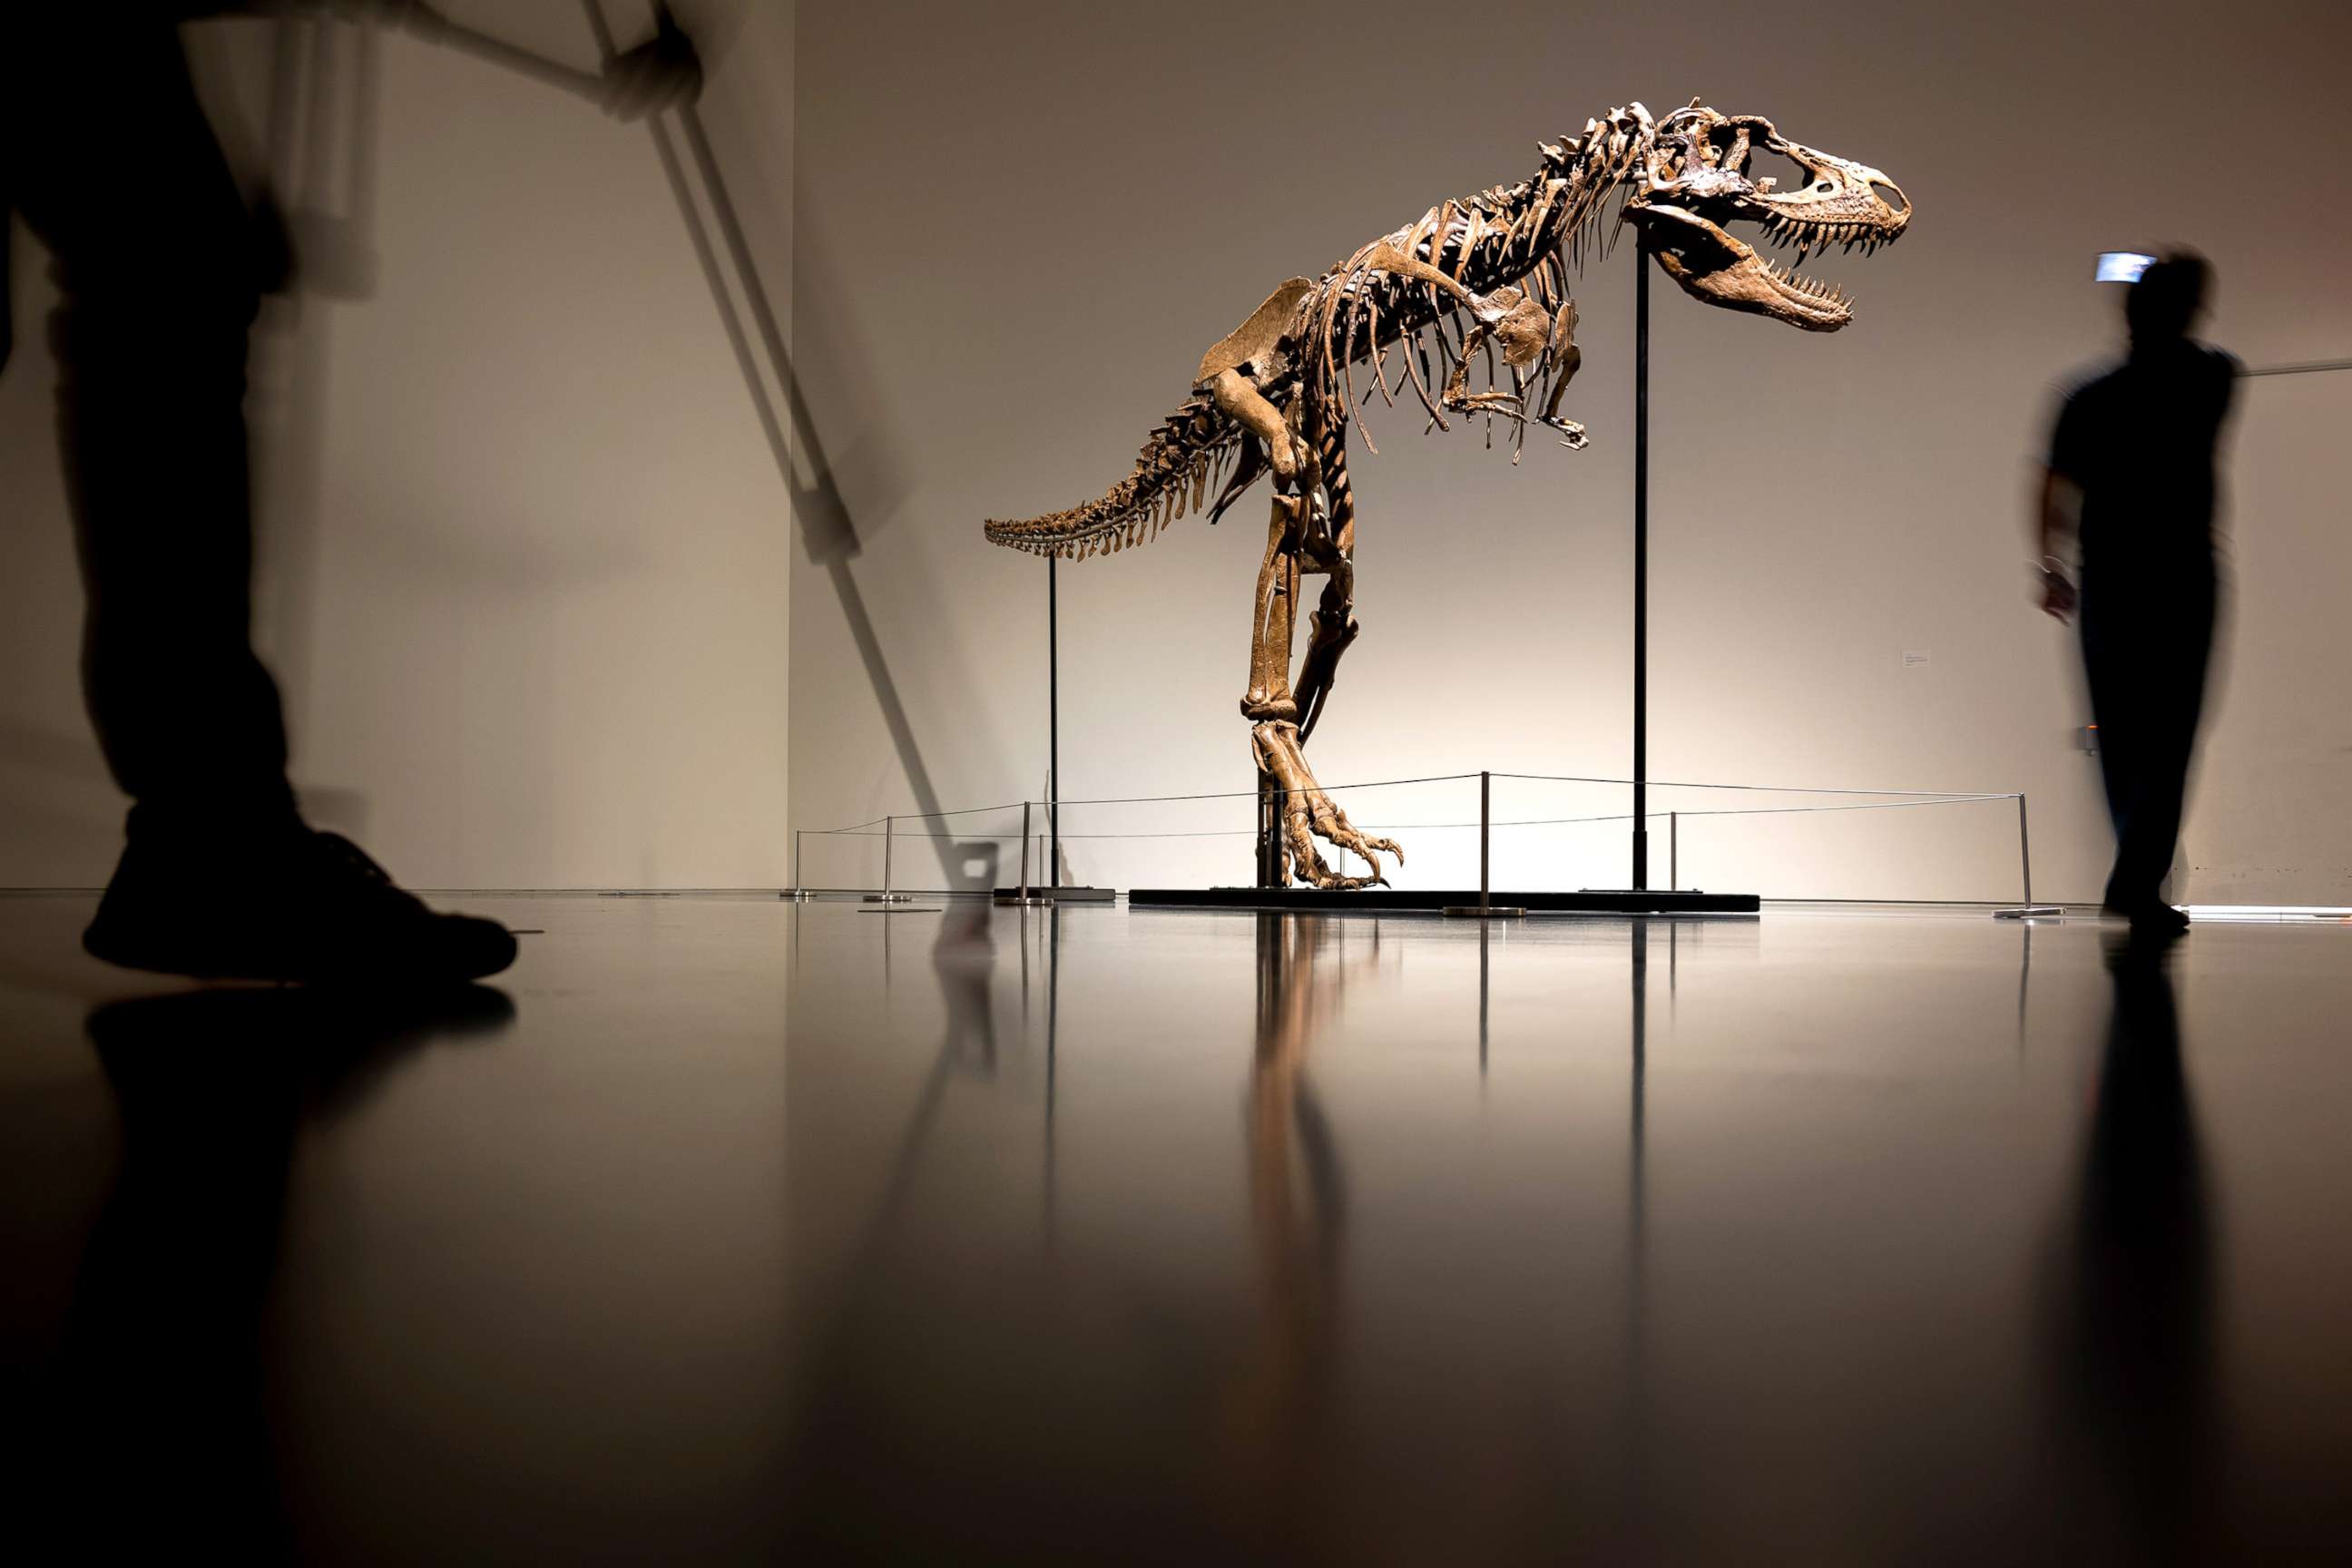 PHOTO: People walk around a Gorgosaurus Skeleton on display during a press preview at Sotheby's on July 5, 2022 in New York City.